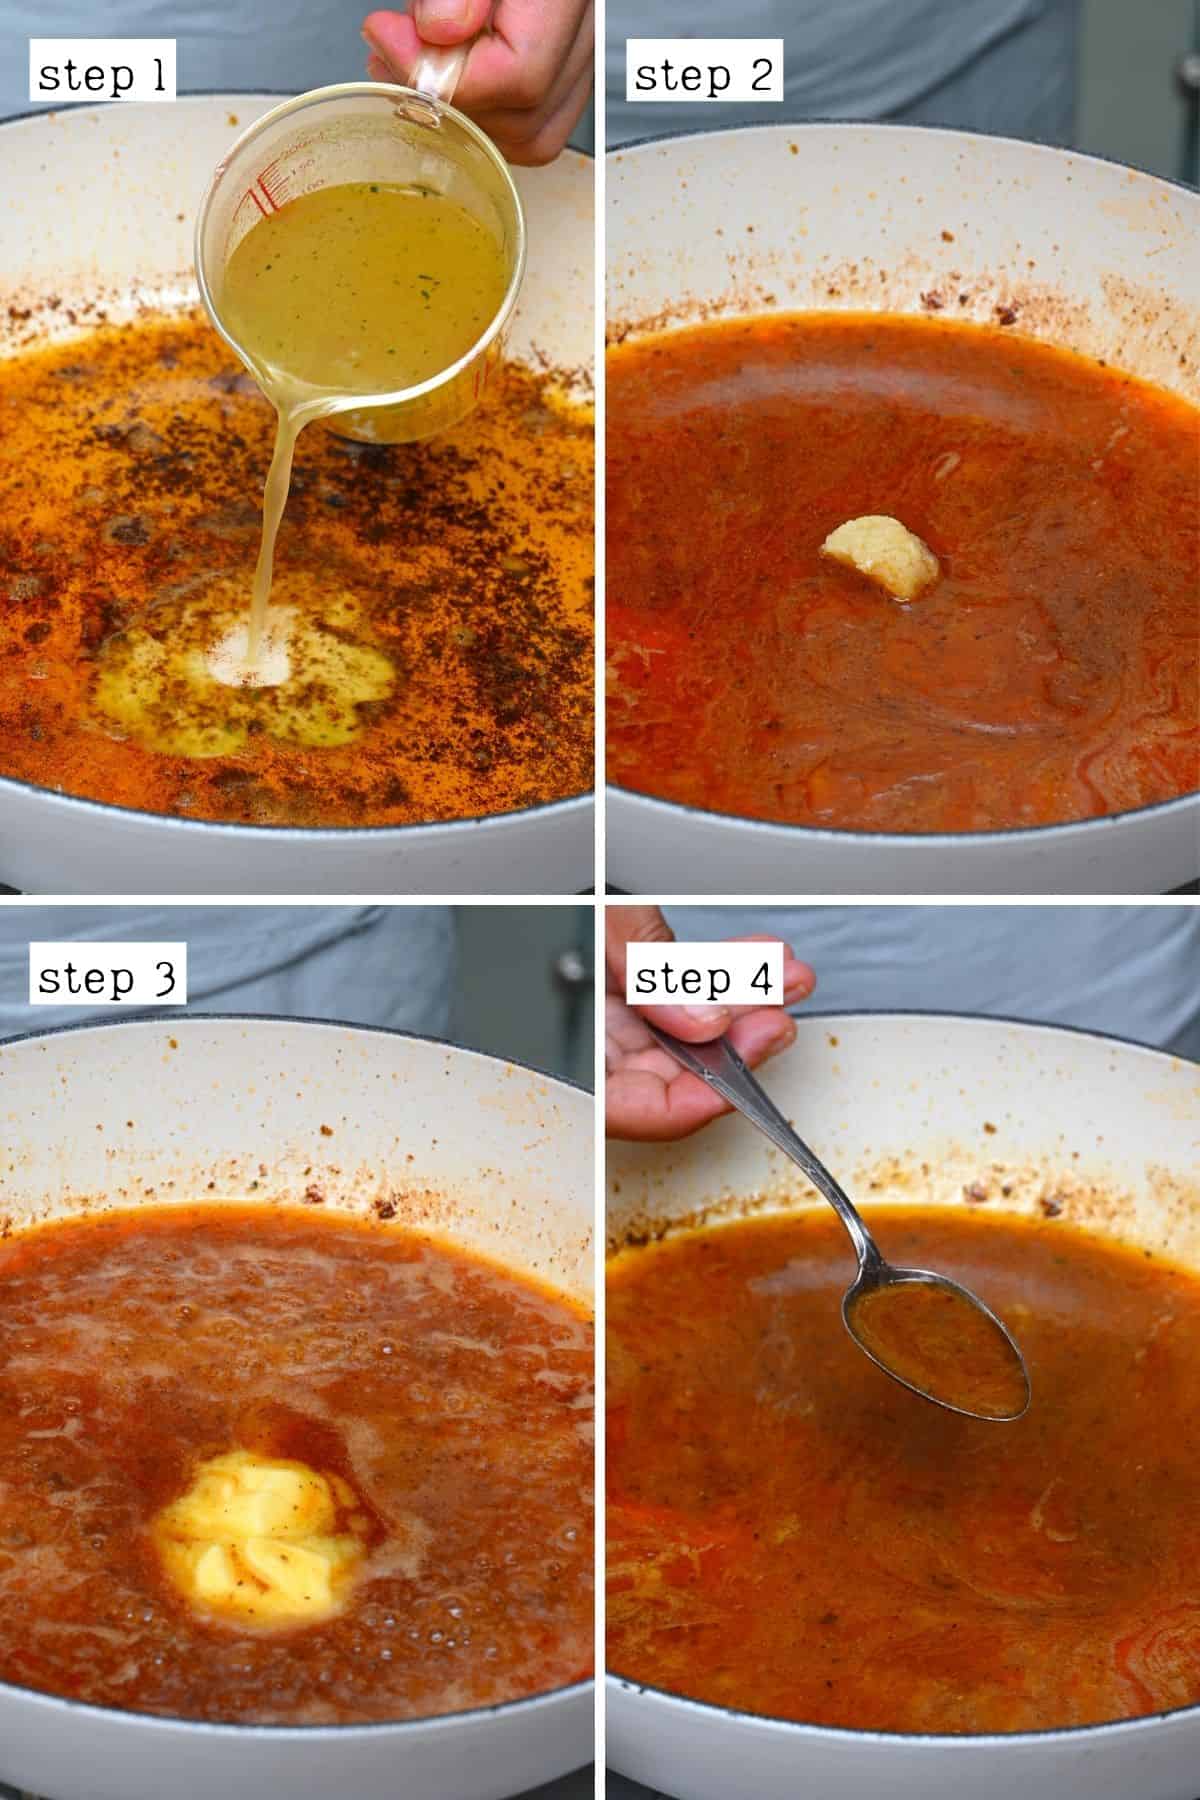 Steps for deglazing a pan making a sauce